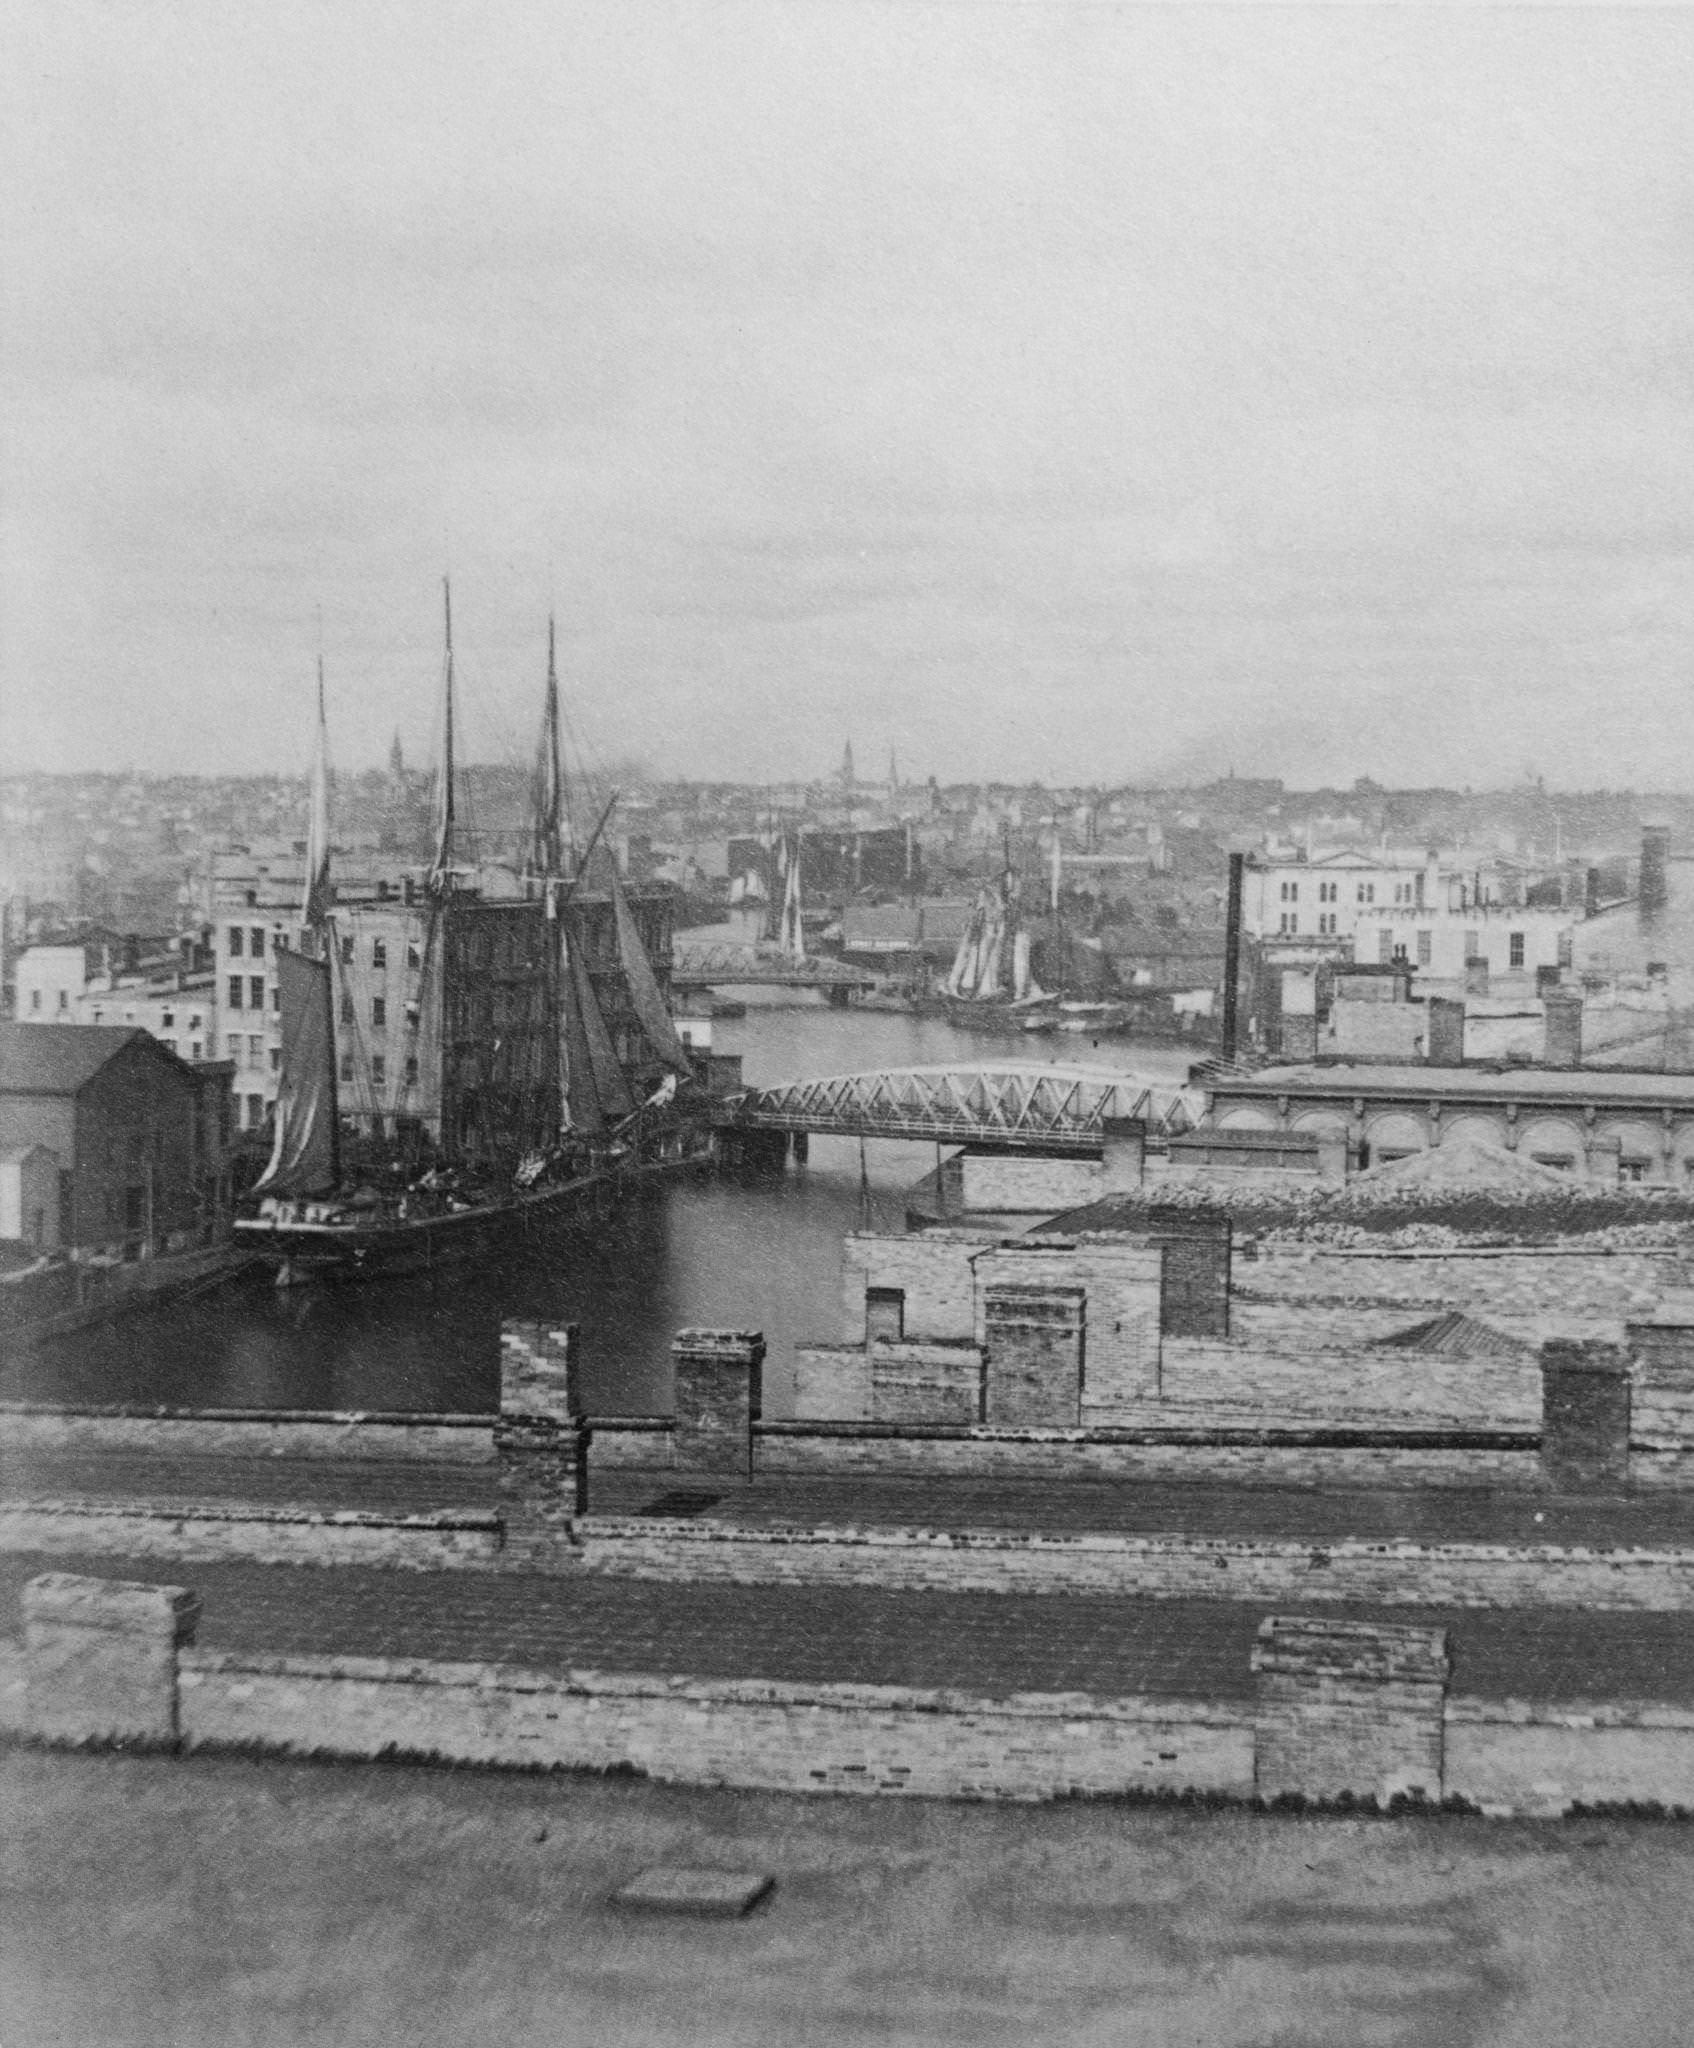 High angle view of a ship moored at a wharf on the Milwaukee River in Milwaukee, Wisconsin, 1875.